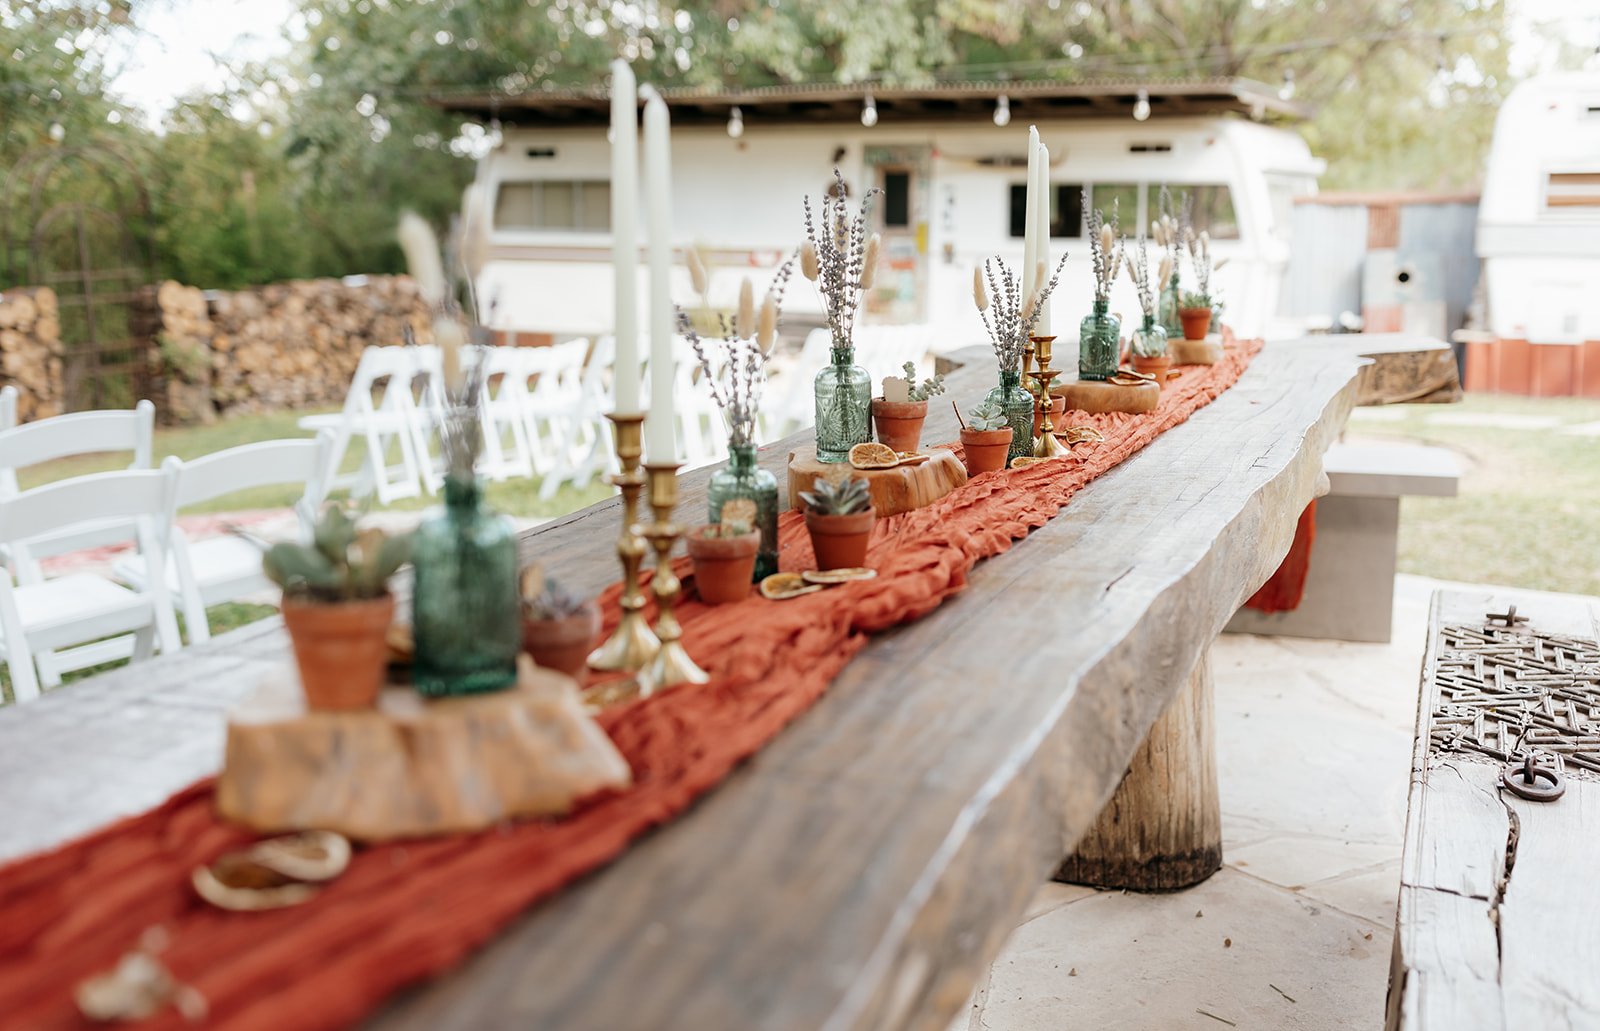 Another angle of the DIY rust-orange wedding table setting with vingtage campers in the background